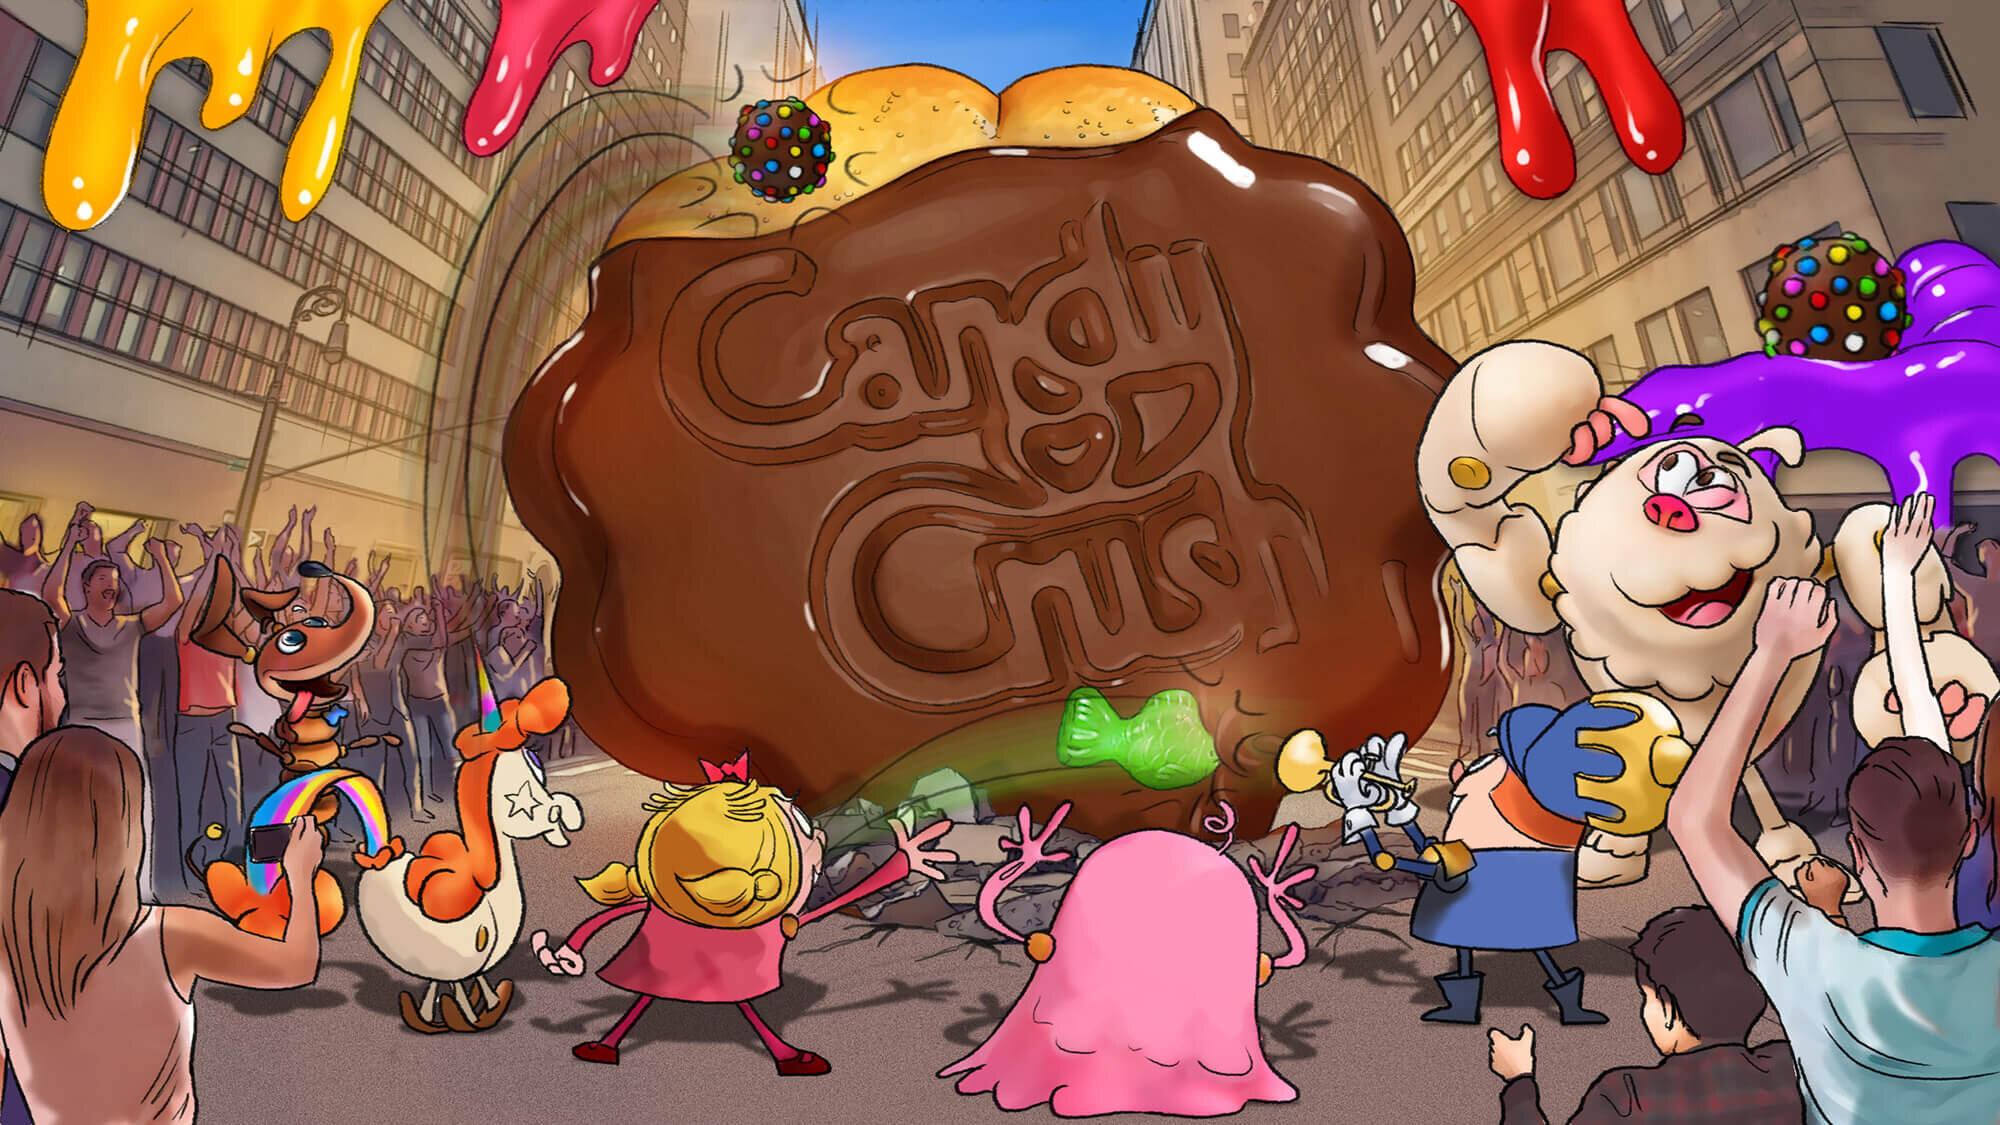 Candy_Crush_Day_Cadies_Storyboards_4.jpg